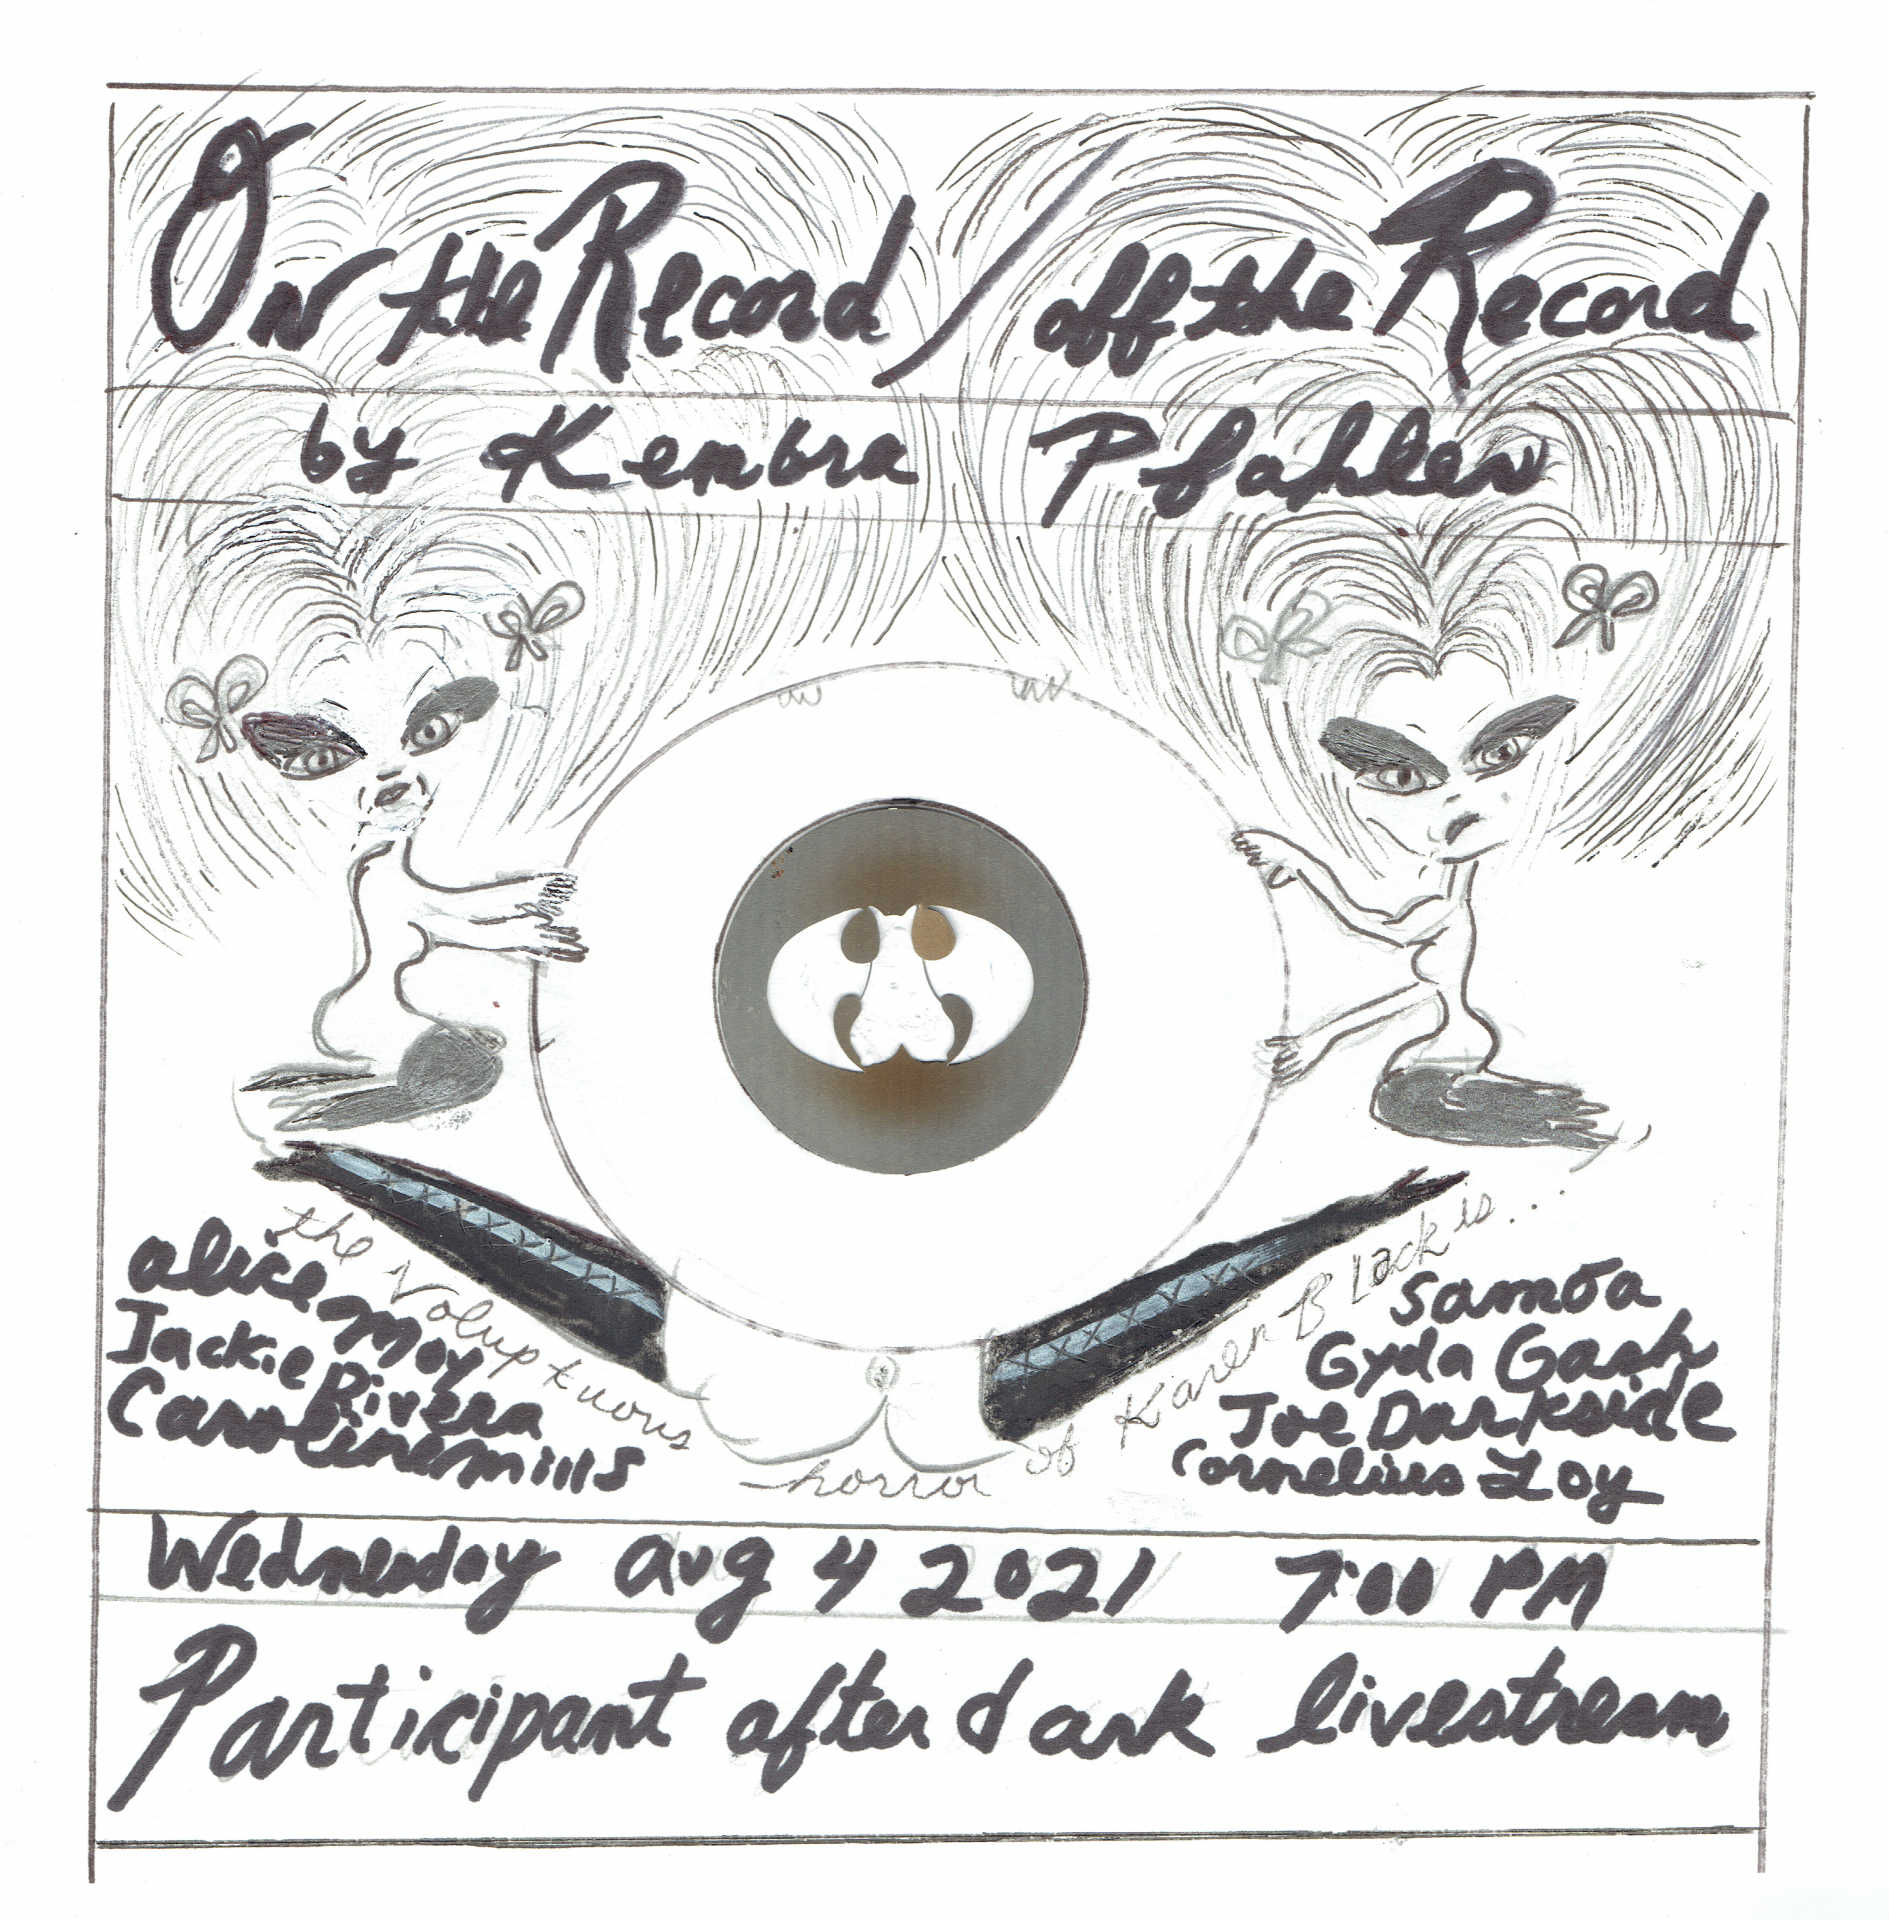 Kembra Pfahler, *On the Record / Off the Record*, 2021, hand-drawn flyer